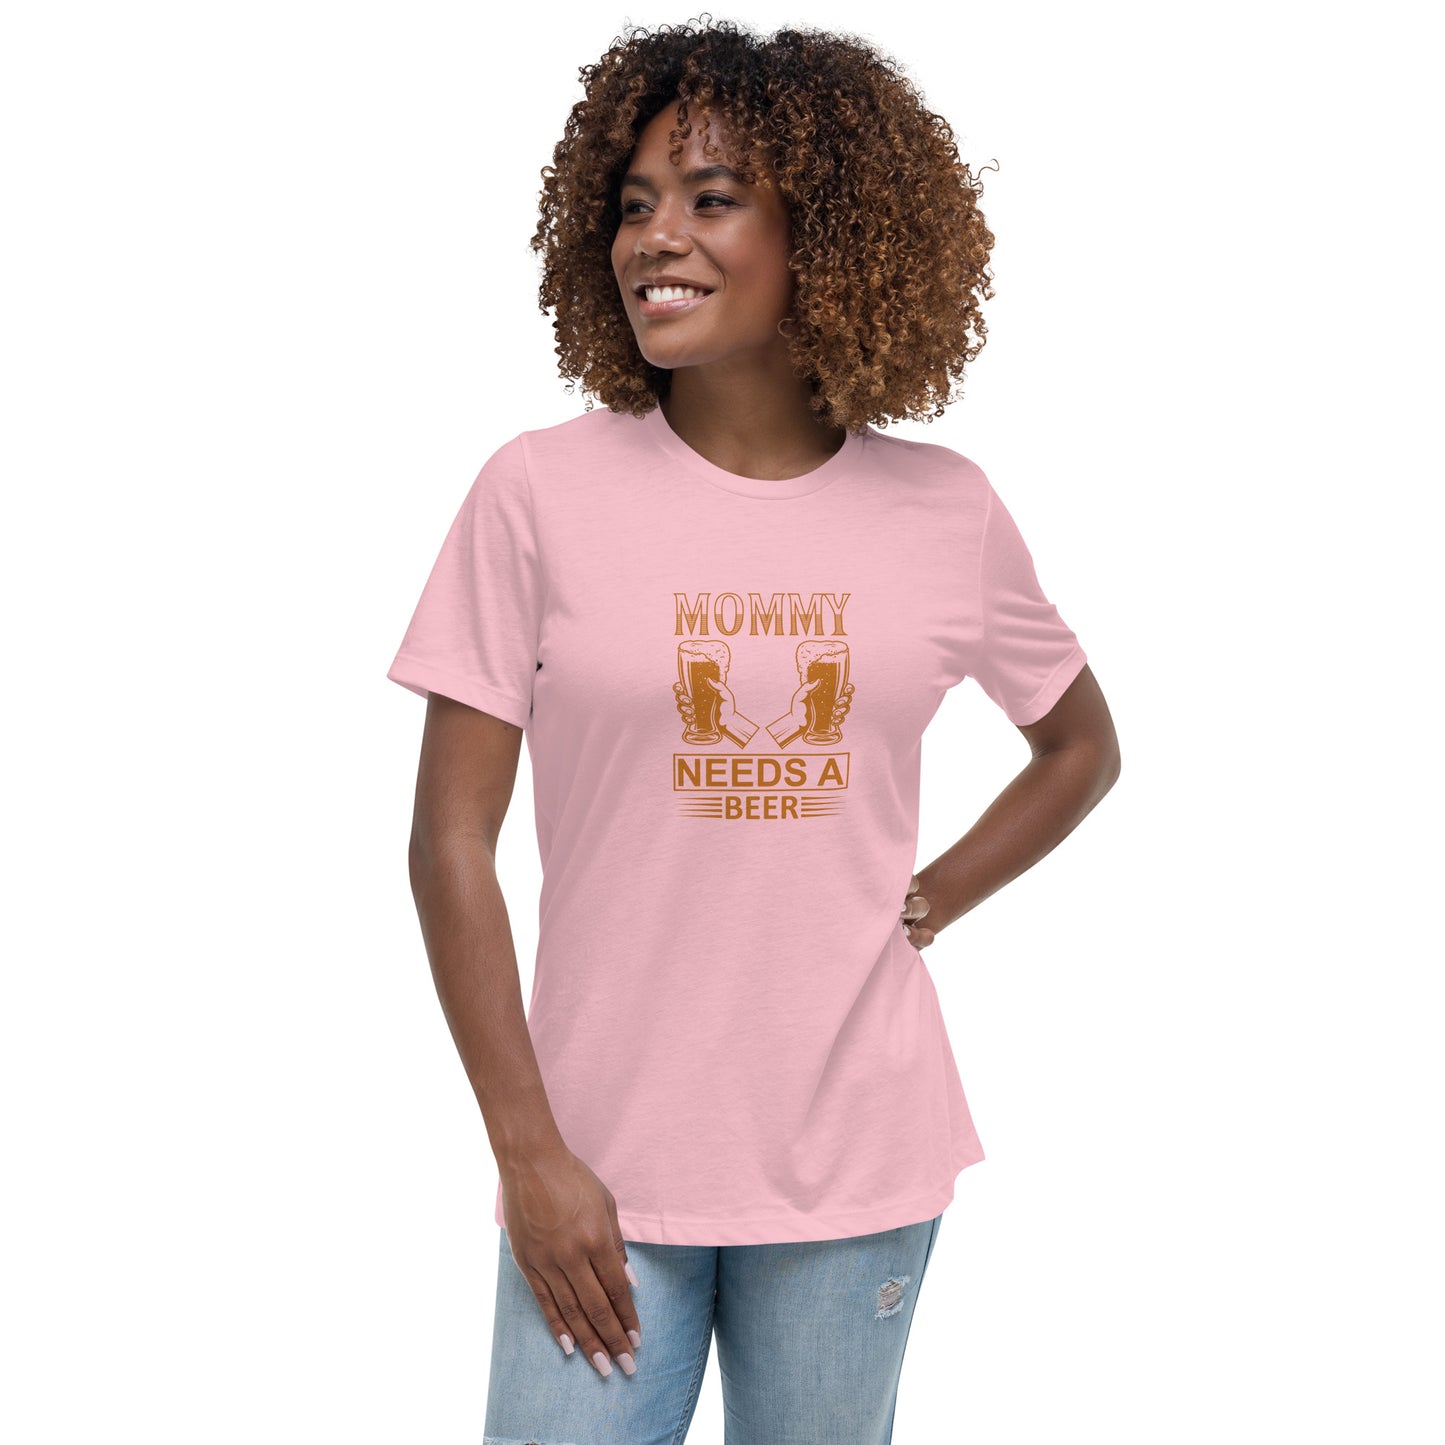 Women's Relaxed T-Shirt MOMMY NEEDS A BEER